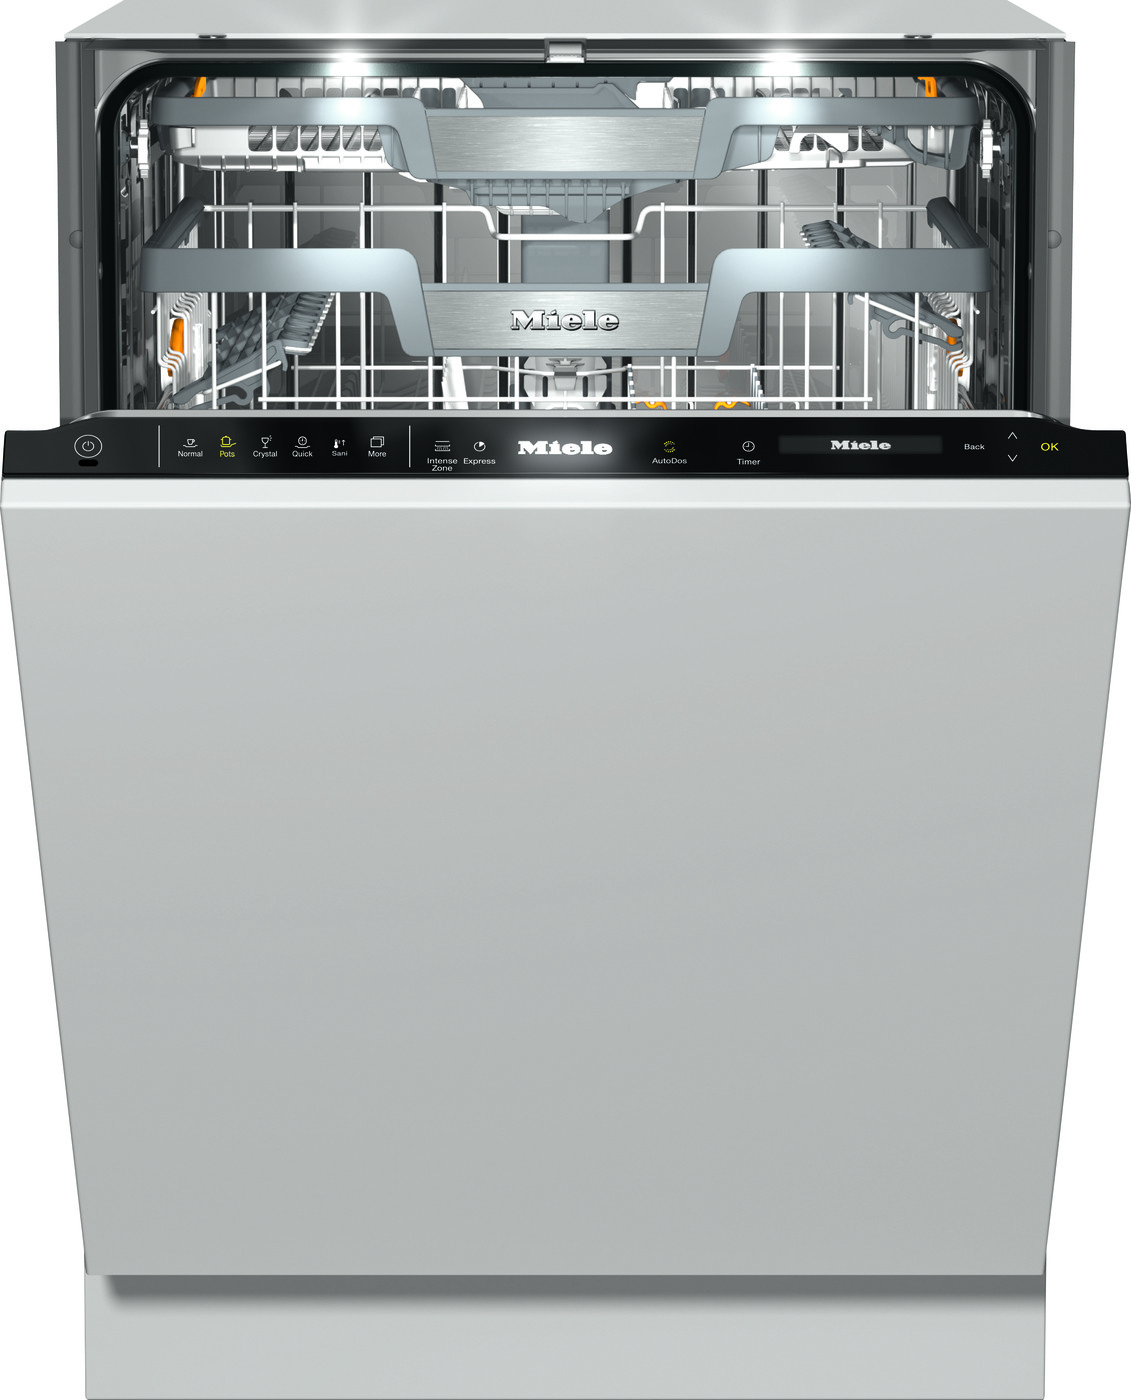 24"" Fully Integrated Built In Dishwasher - Miele G7596SCVI